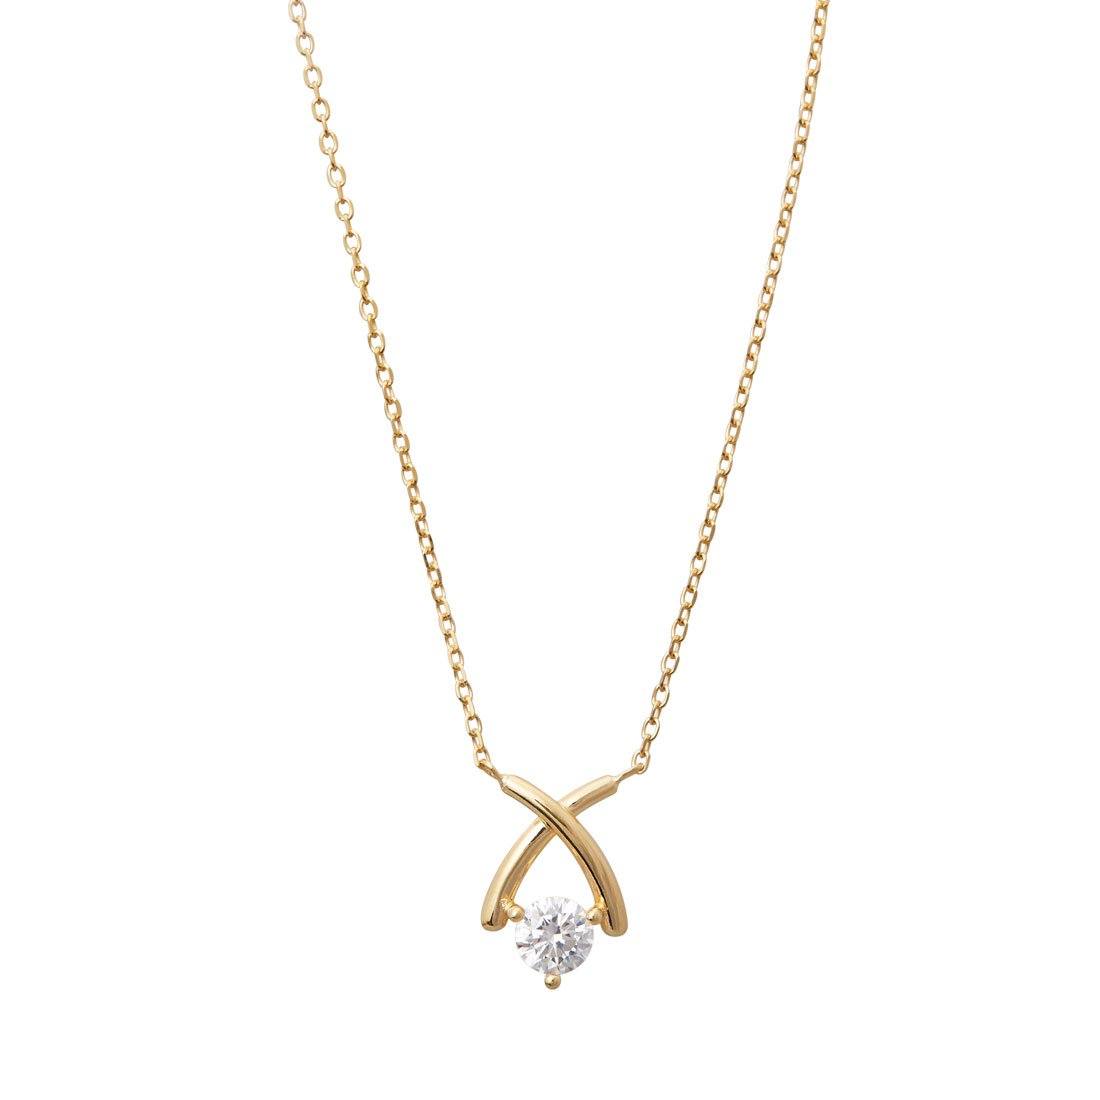 X O Cubic Zirconia Necklace in 9ct Yellow Gold Silver Infused Necklaces Bevilles 